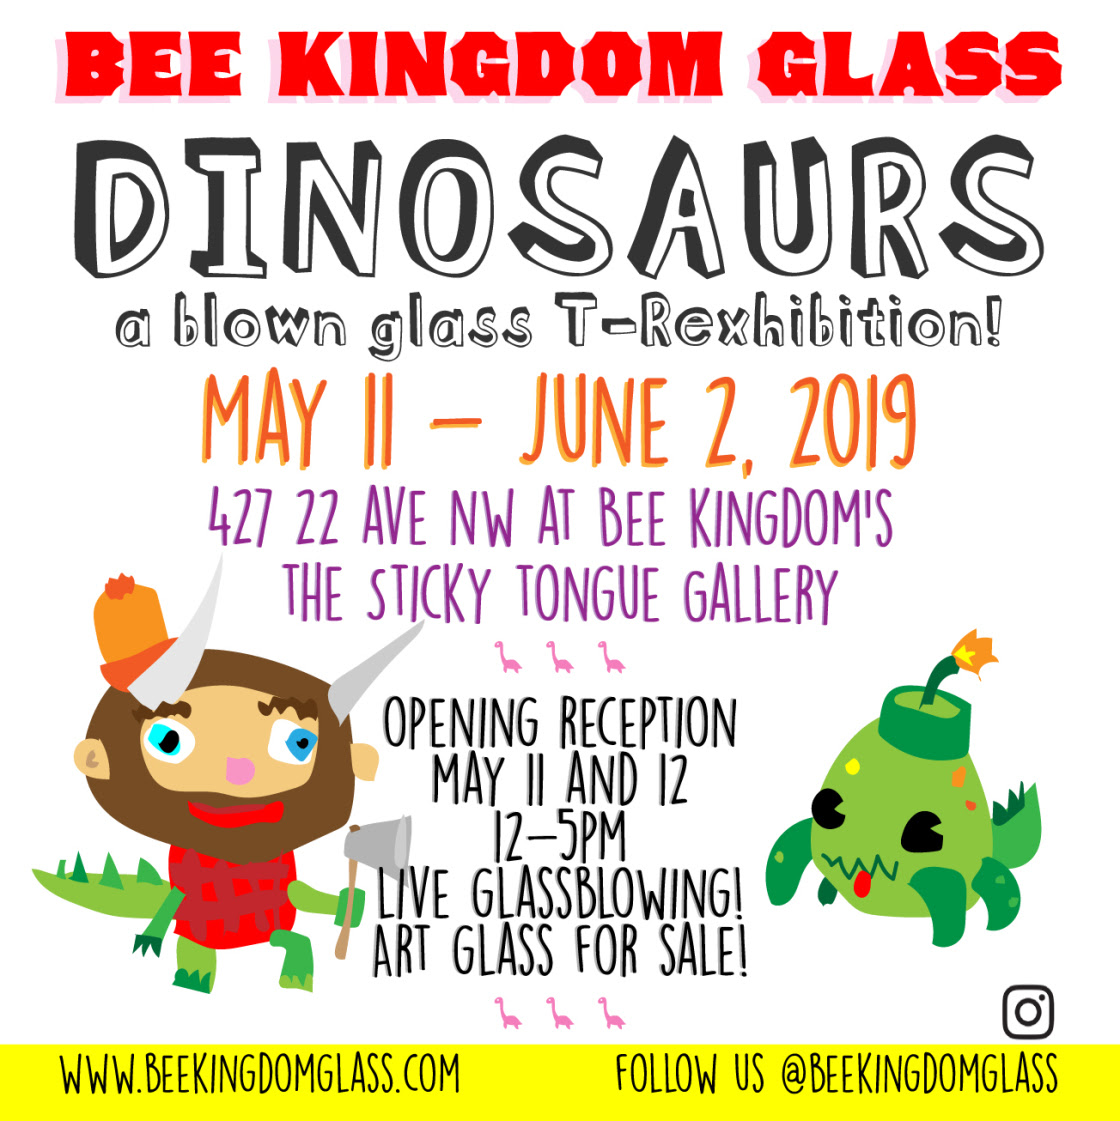 A poster for Dinosaurs: A Blown Glass T-Rexhibition at Bee Kingdom